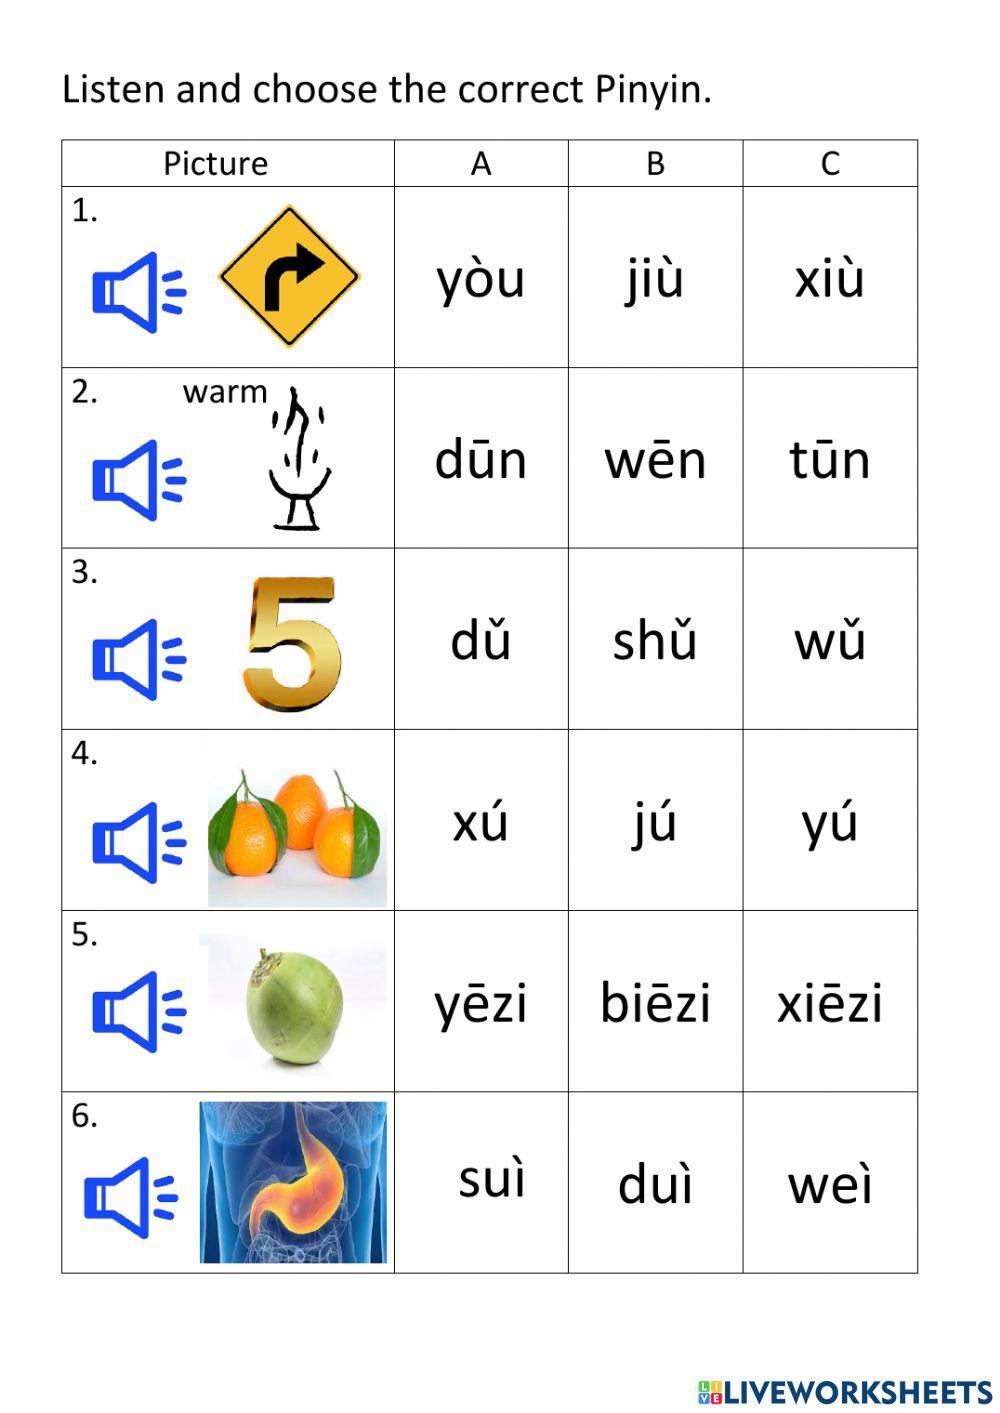 Pinyin-- Y and W